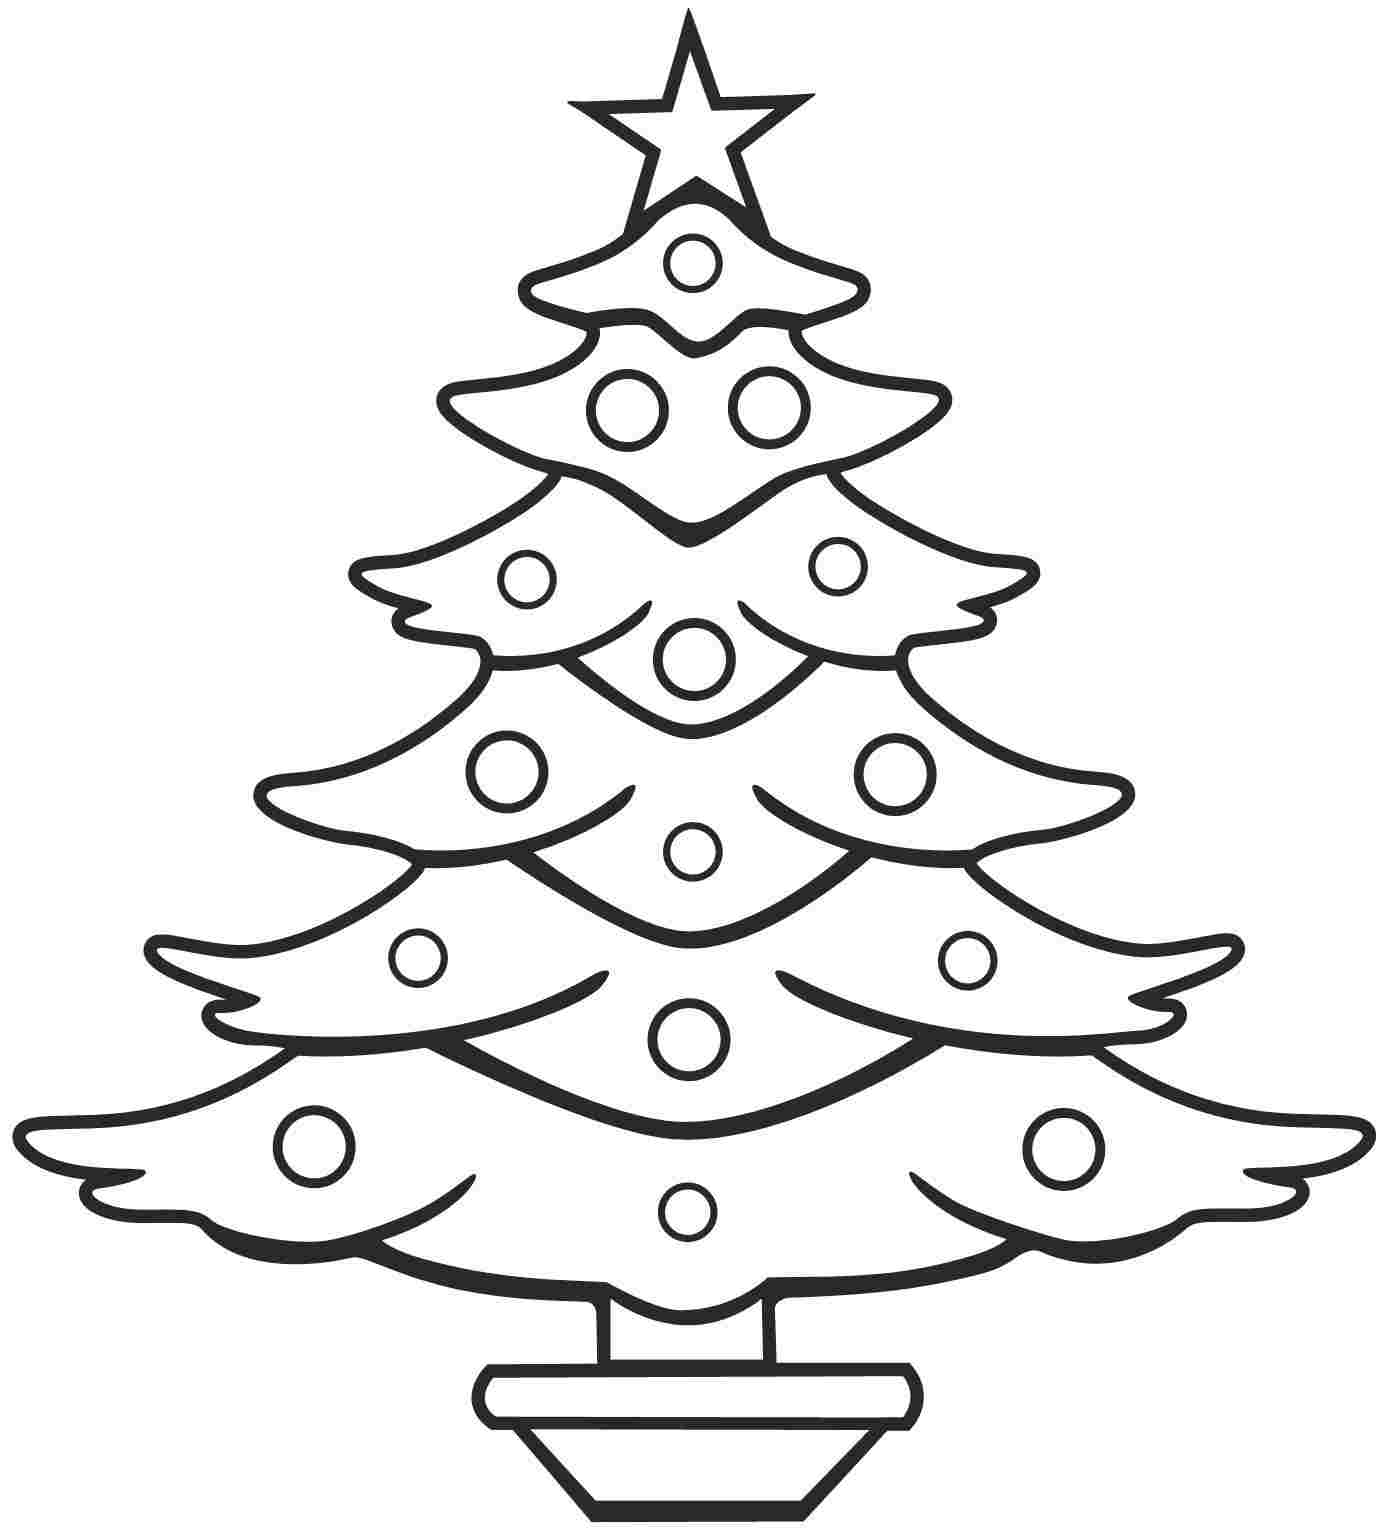 Christmas Tree Coloring Page Printables - Coloring Pages For All Ages